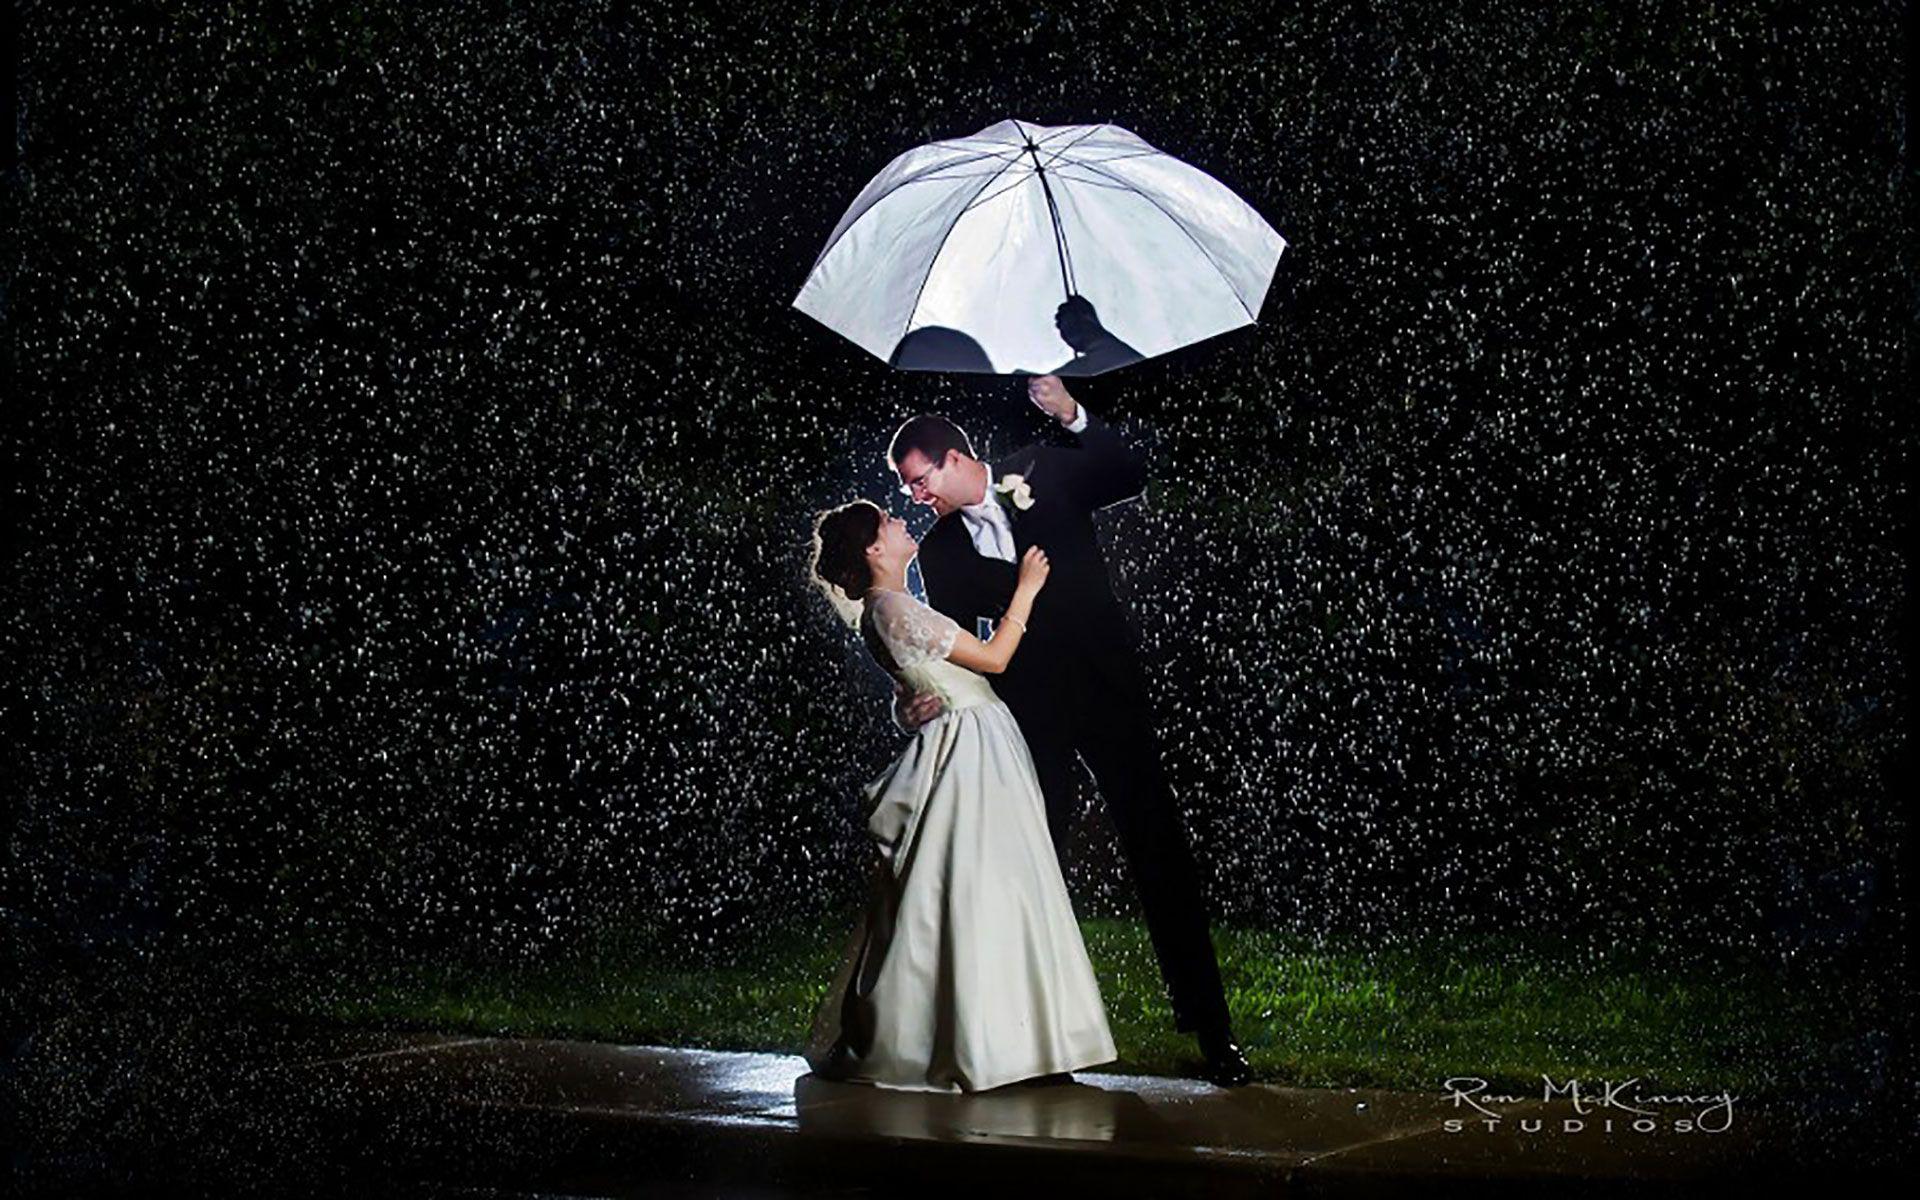 Wallpapers Of Love And Romance In Rain - Wallpaper Cave